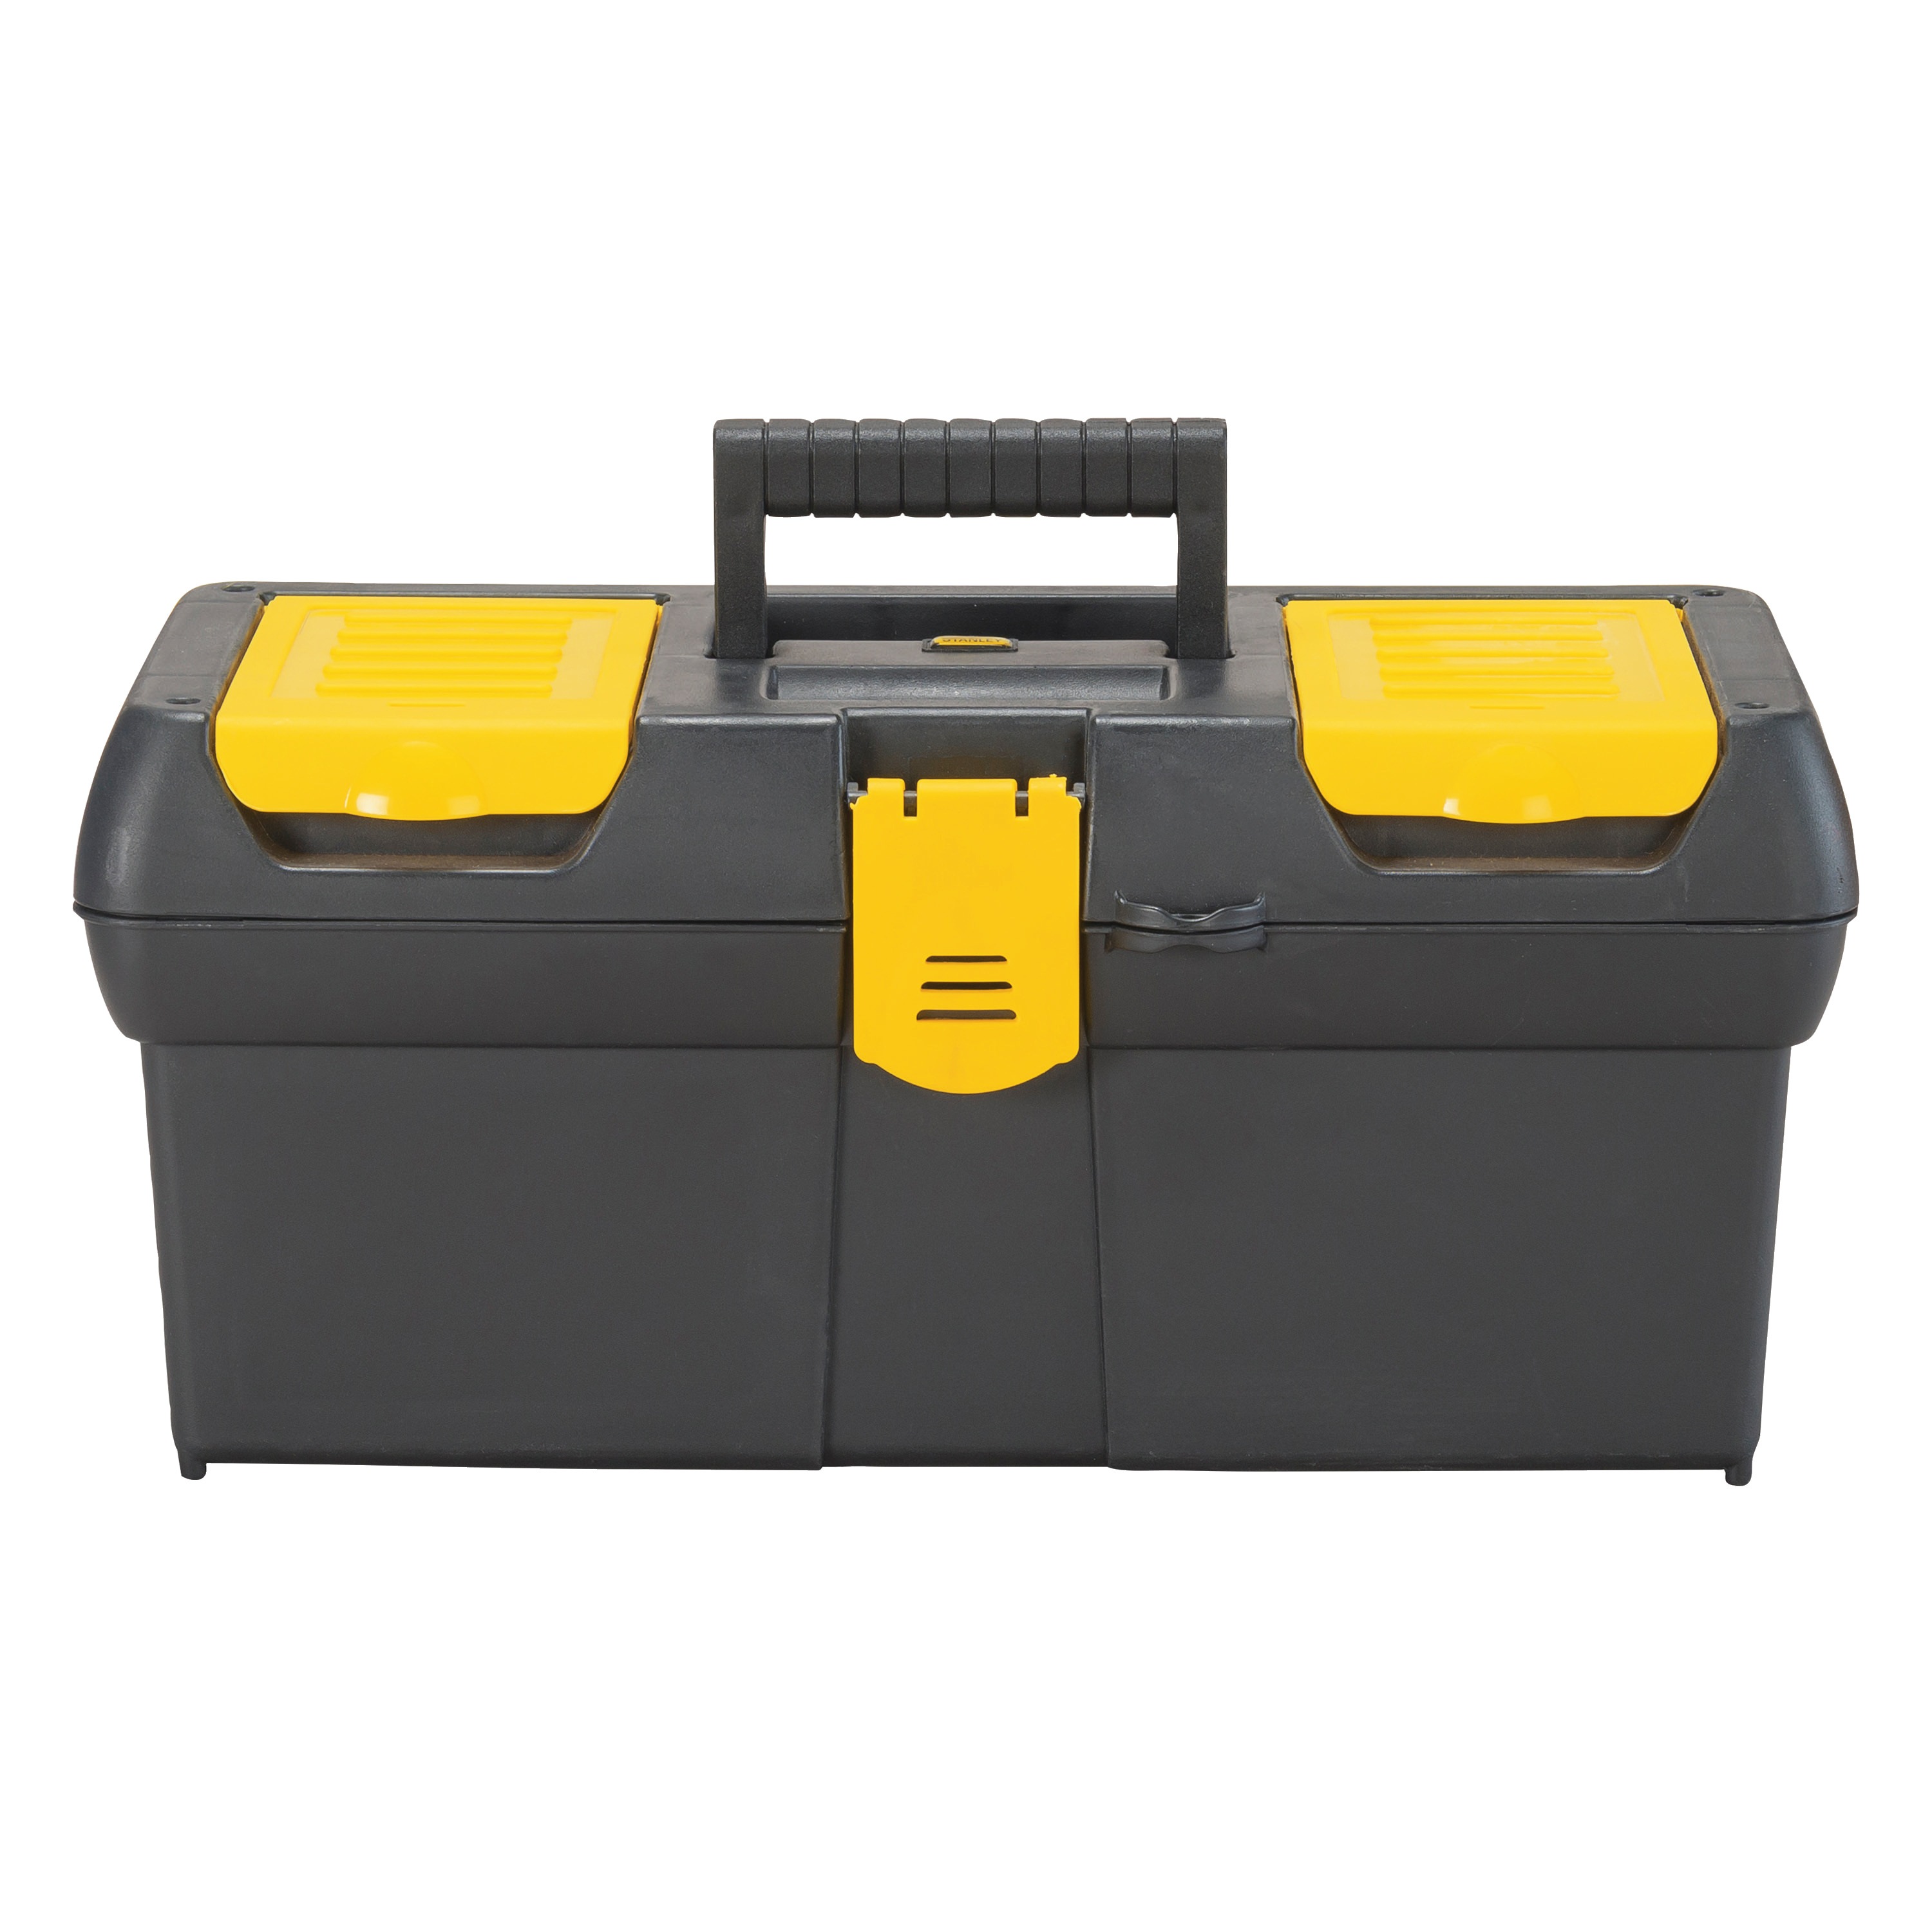 Stanley Tools - 16 in Portable Plastic Toolbox - 016011R